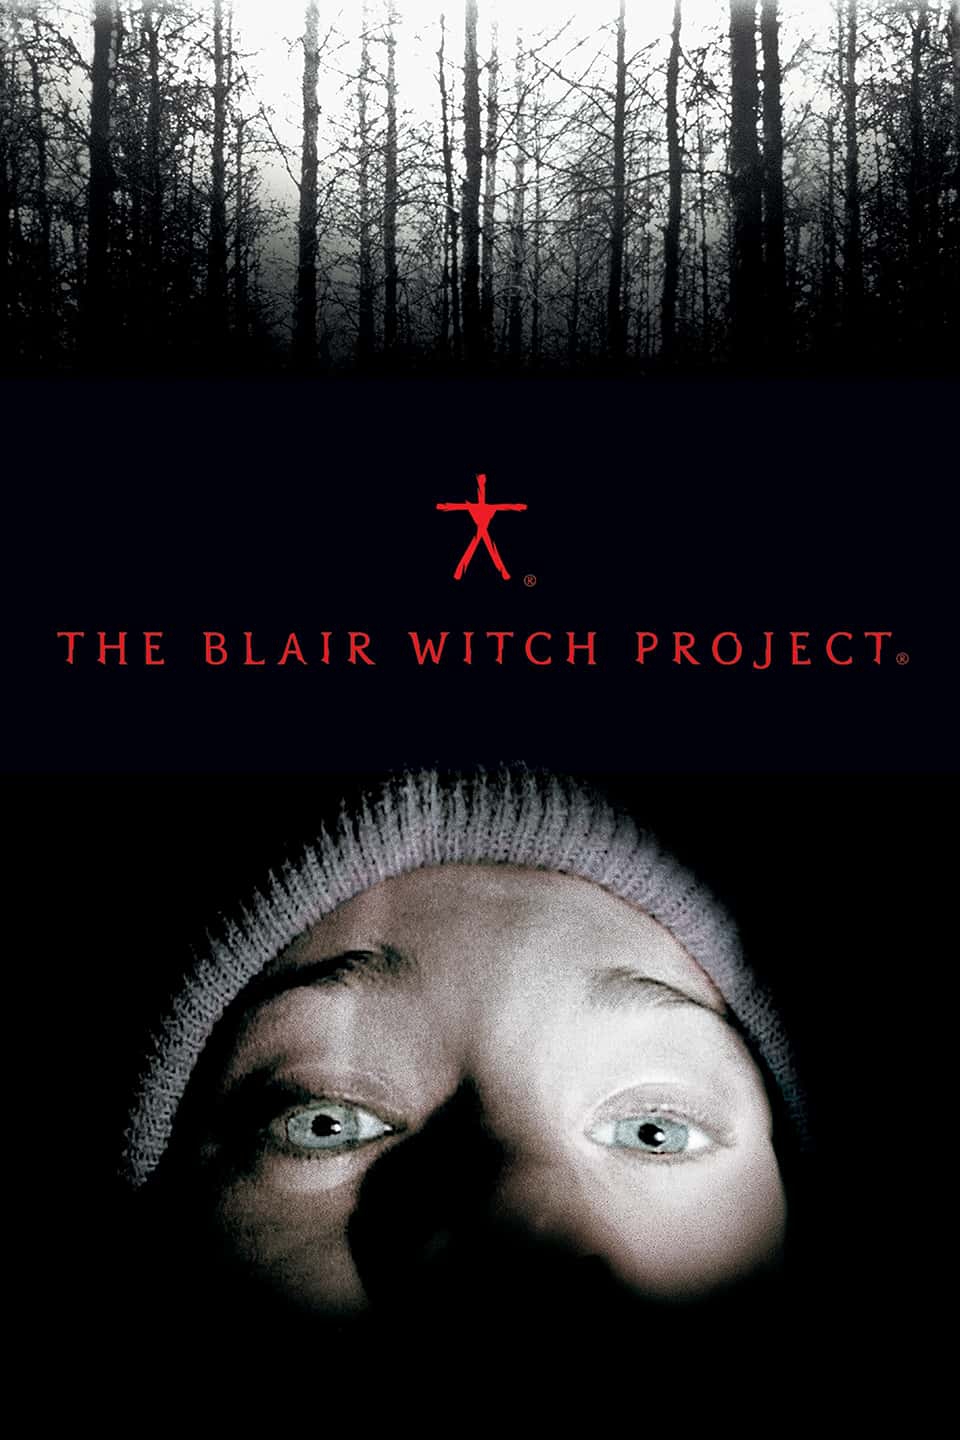 blair witch project 2016 download free